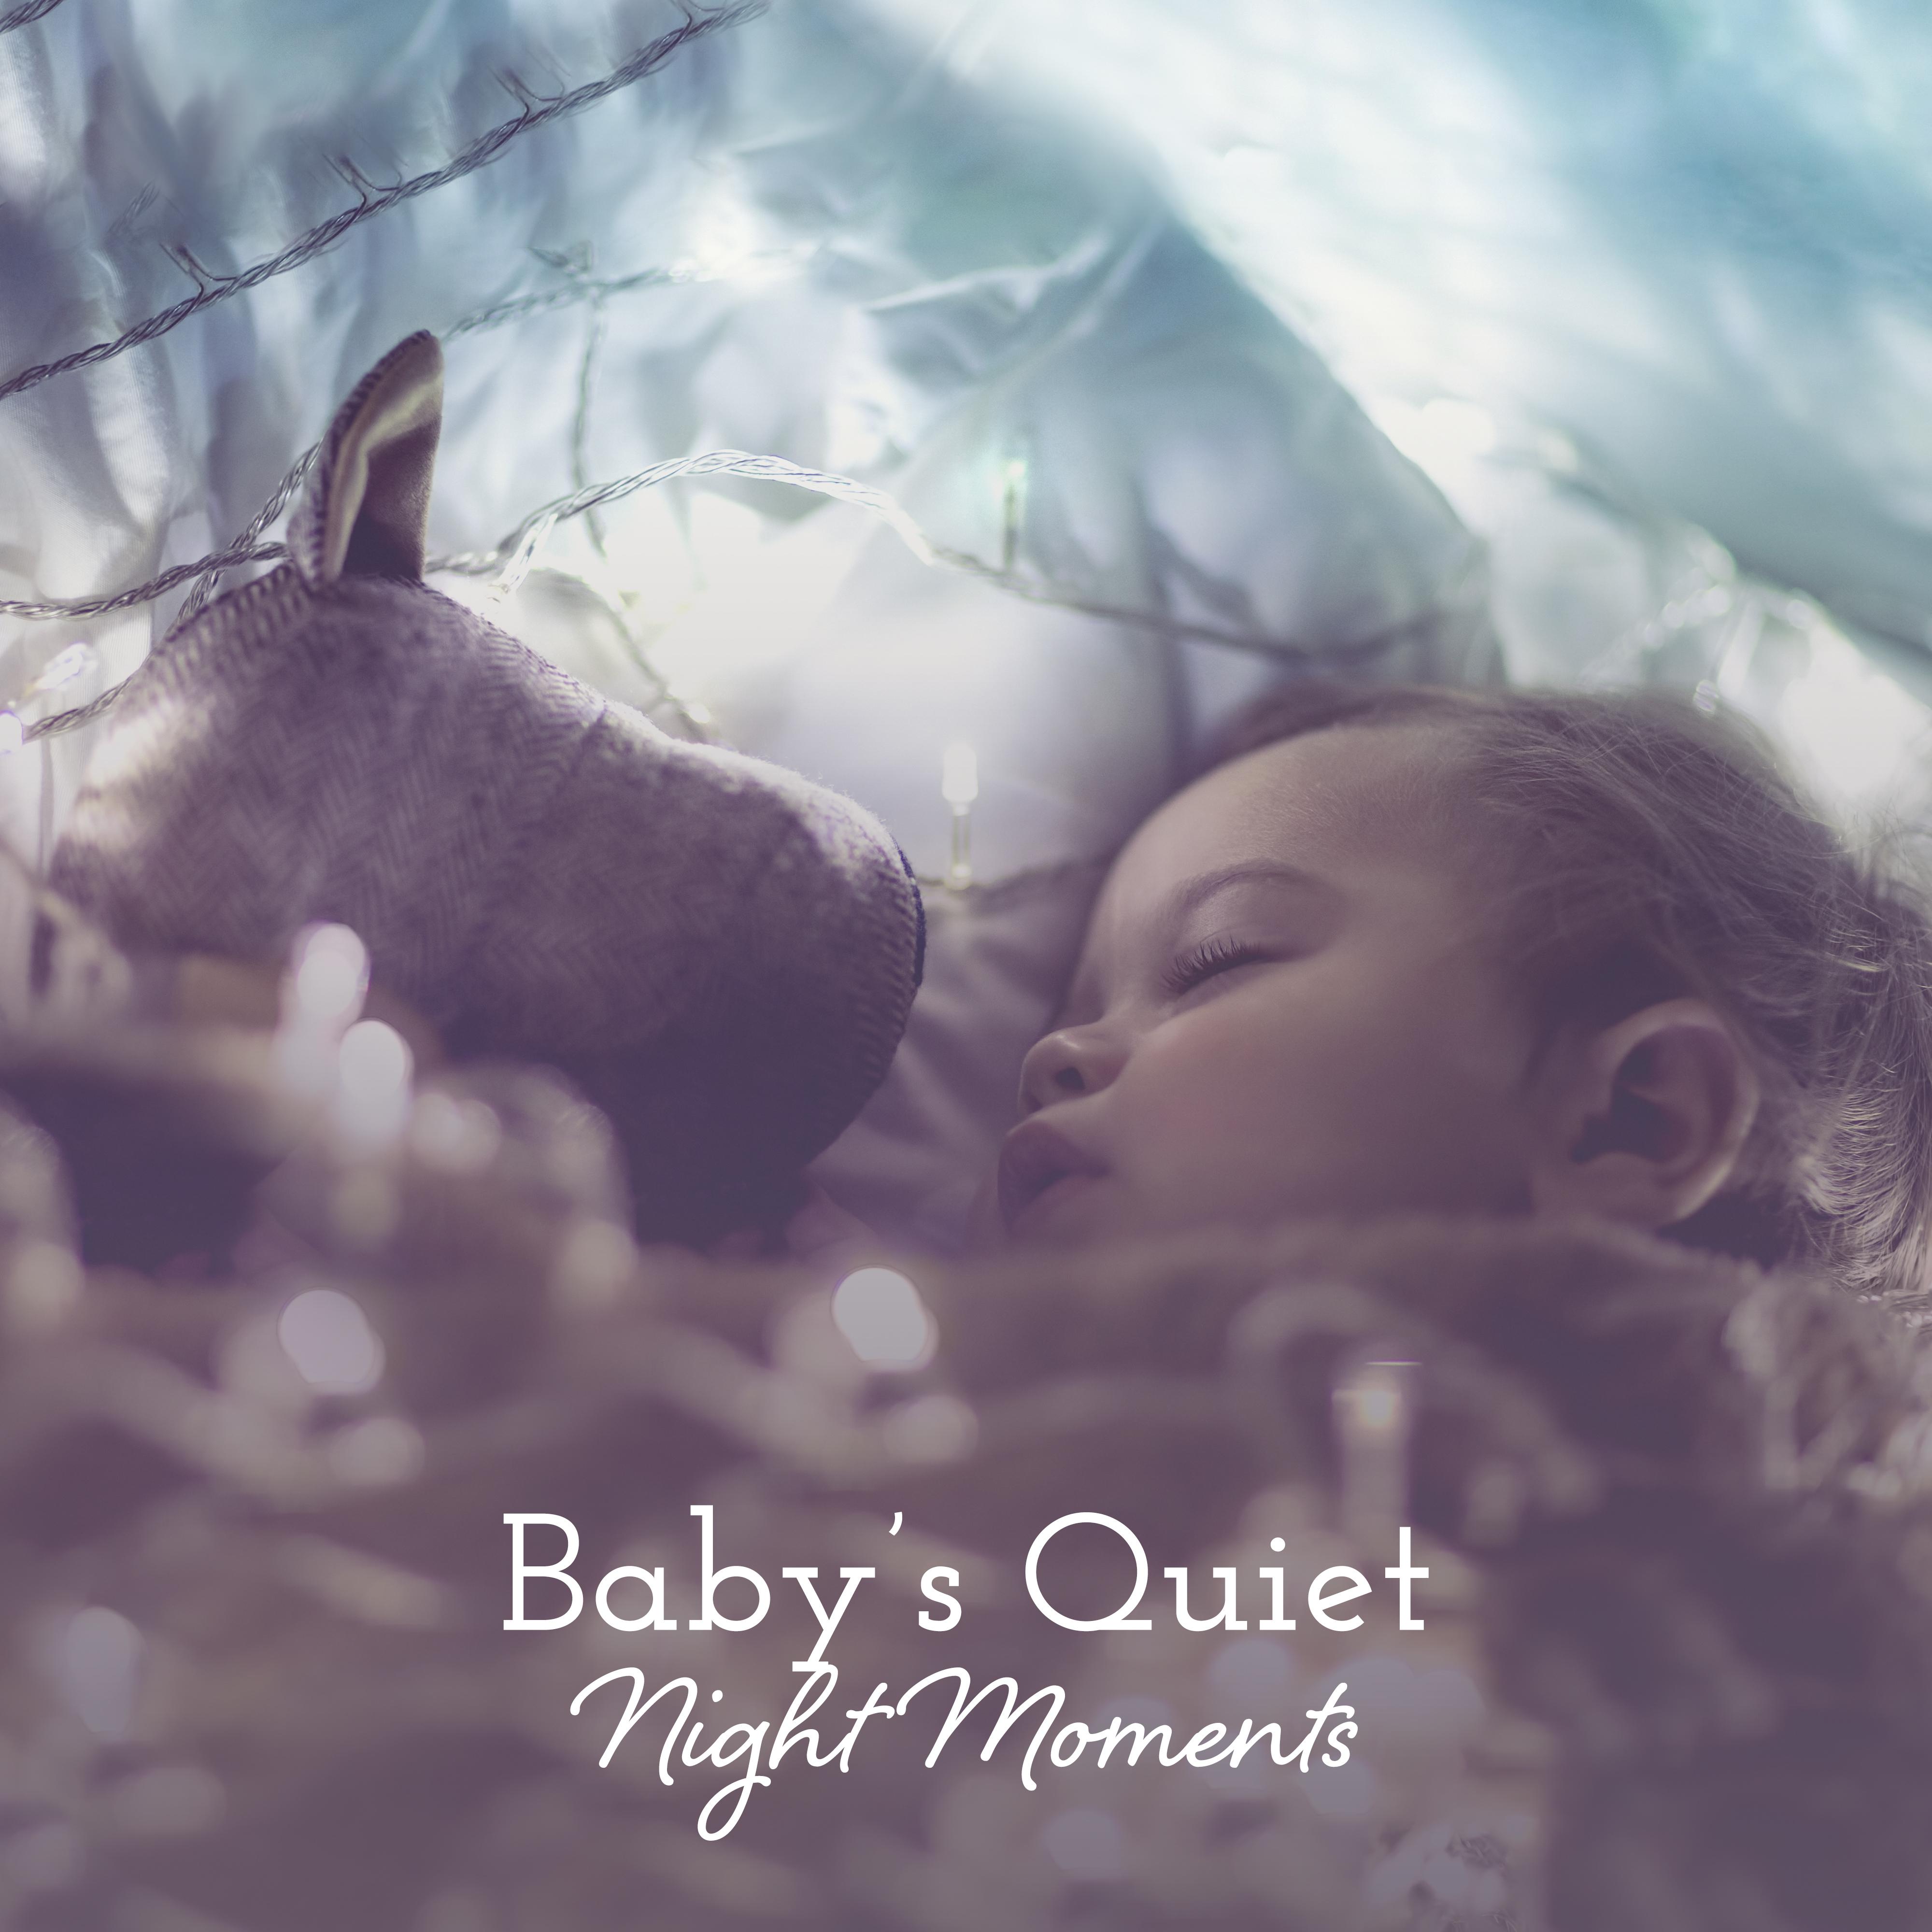 Baby’s Quiet Night Moments: 2019 New Age Soothing Music Selection for Baby & Parents, Calming Down, Cure Insomnia, Lullabies for Perfect Sleep All Night Long